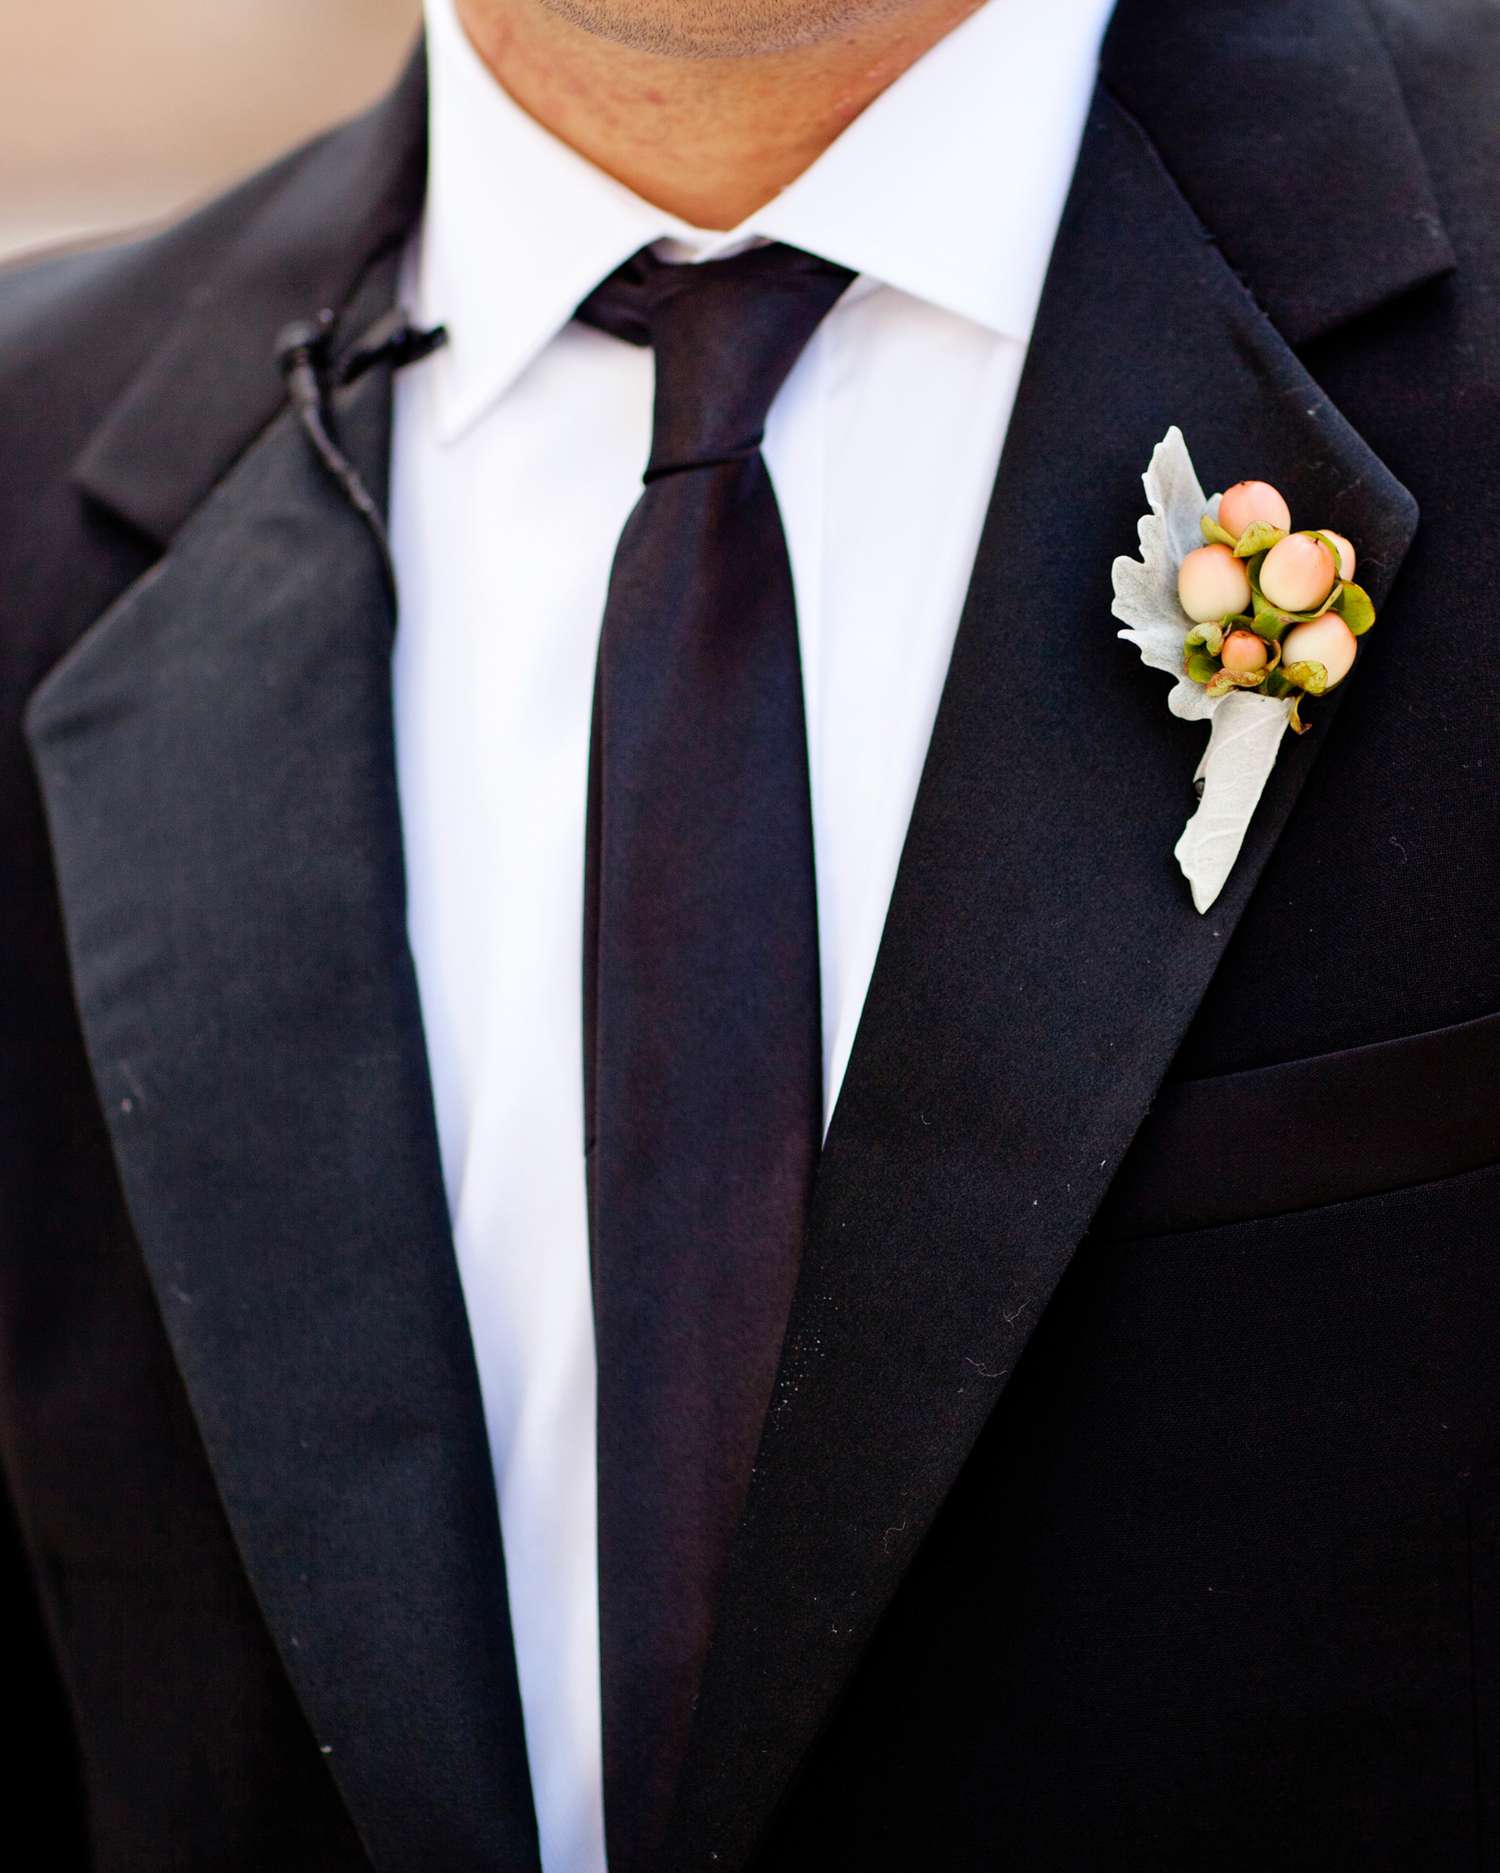 The Boutonniere